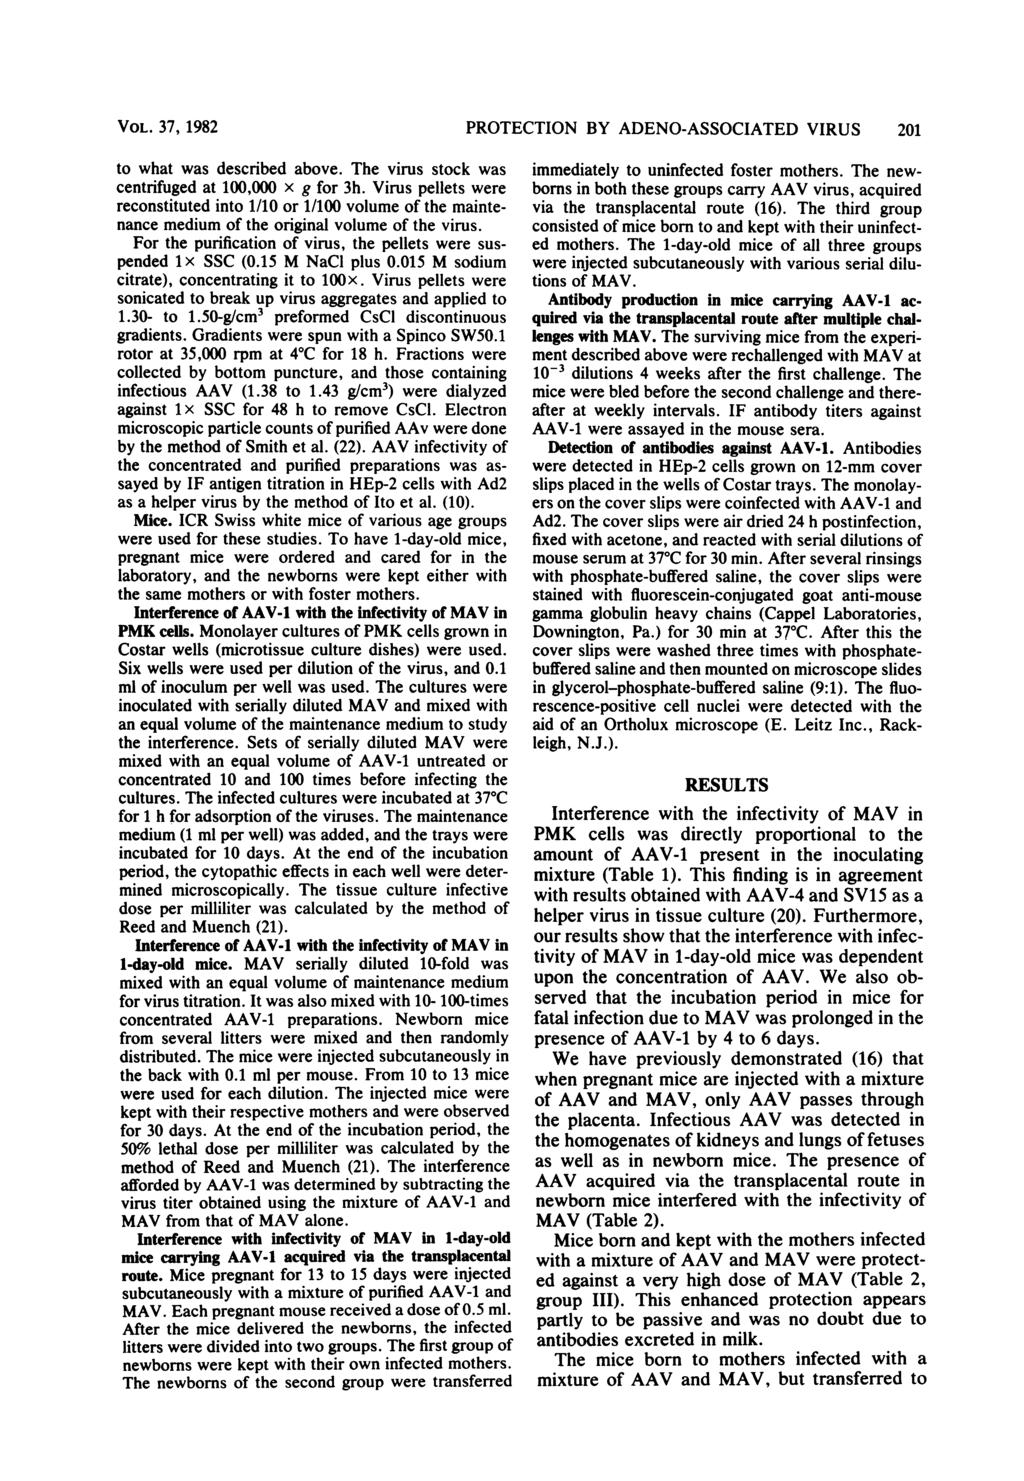 VOL. 37, 1982 PROTECTION BY ADENO-ASSOCIATED VIRUS 201 to what was described above. The virus stock was centrifuged at 100,000 x g for 3h.